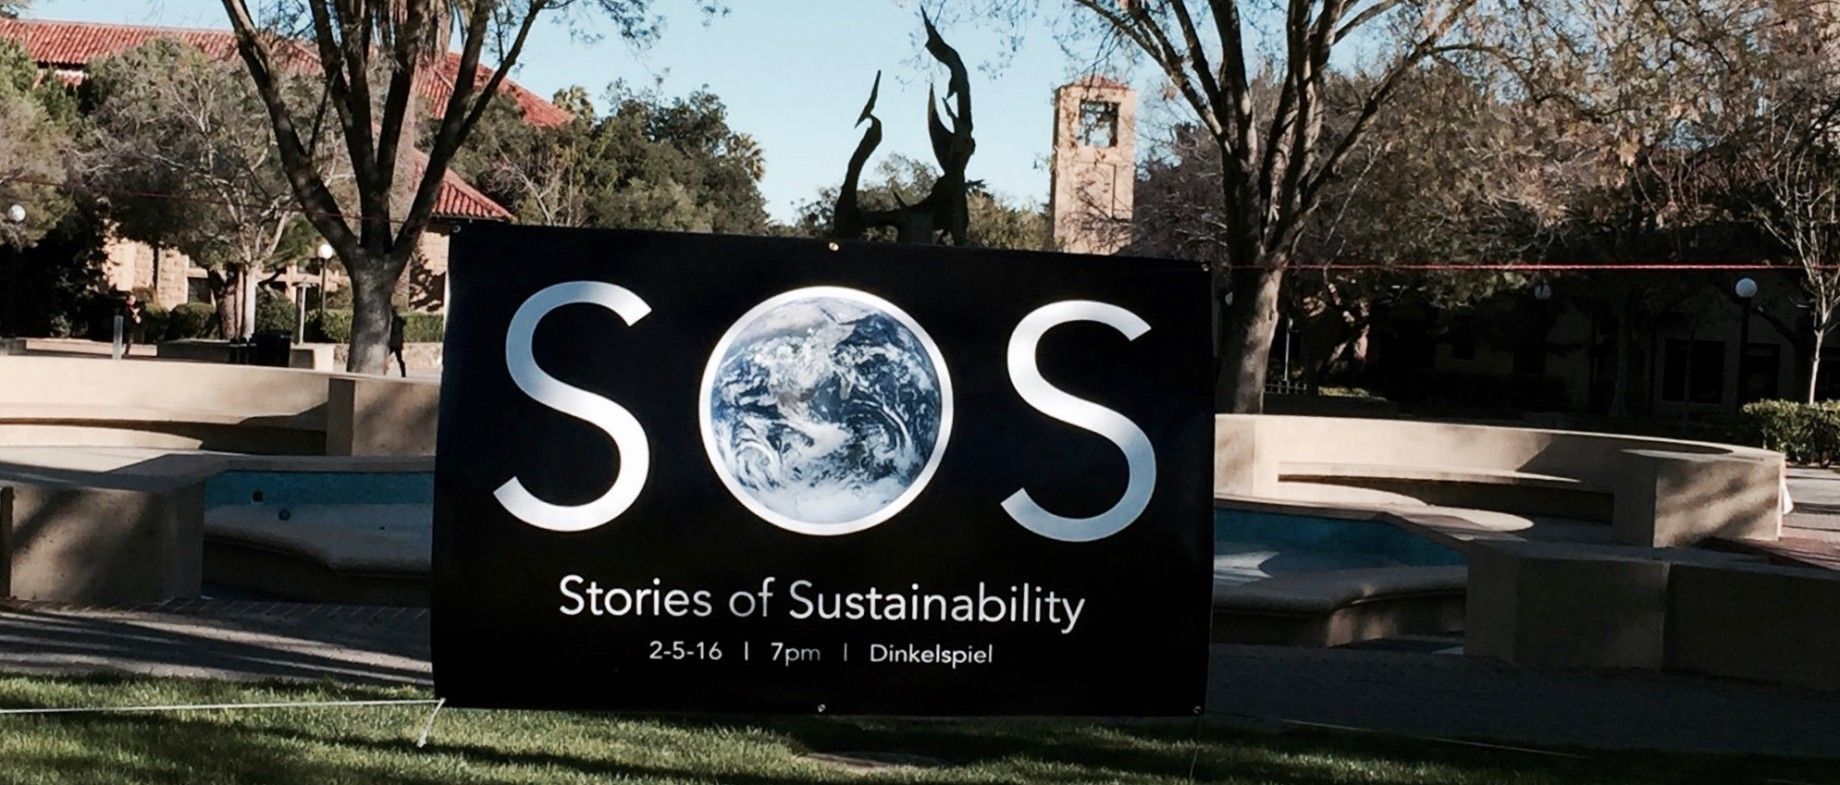 Diversity Requires A Personal Effort: Takeaways from "Stories of Sustainability"